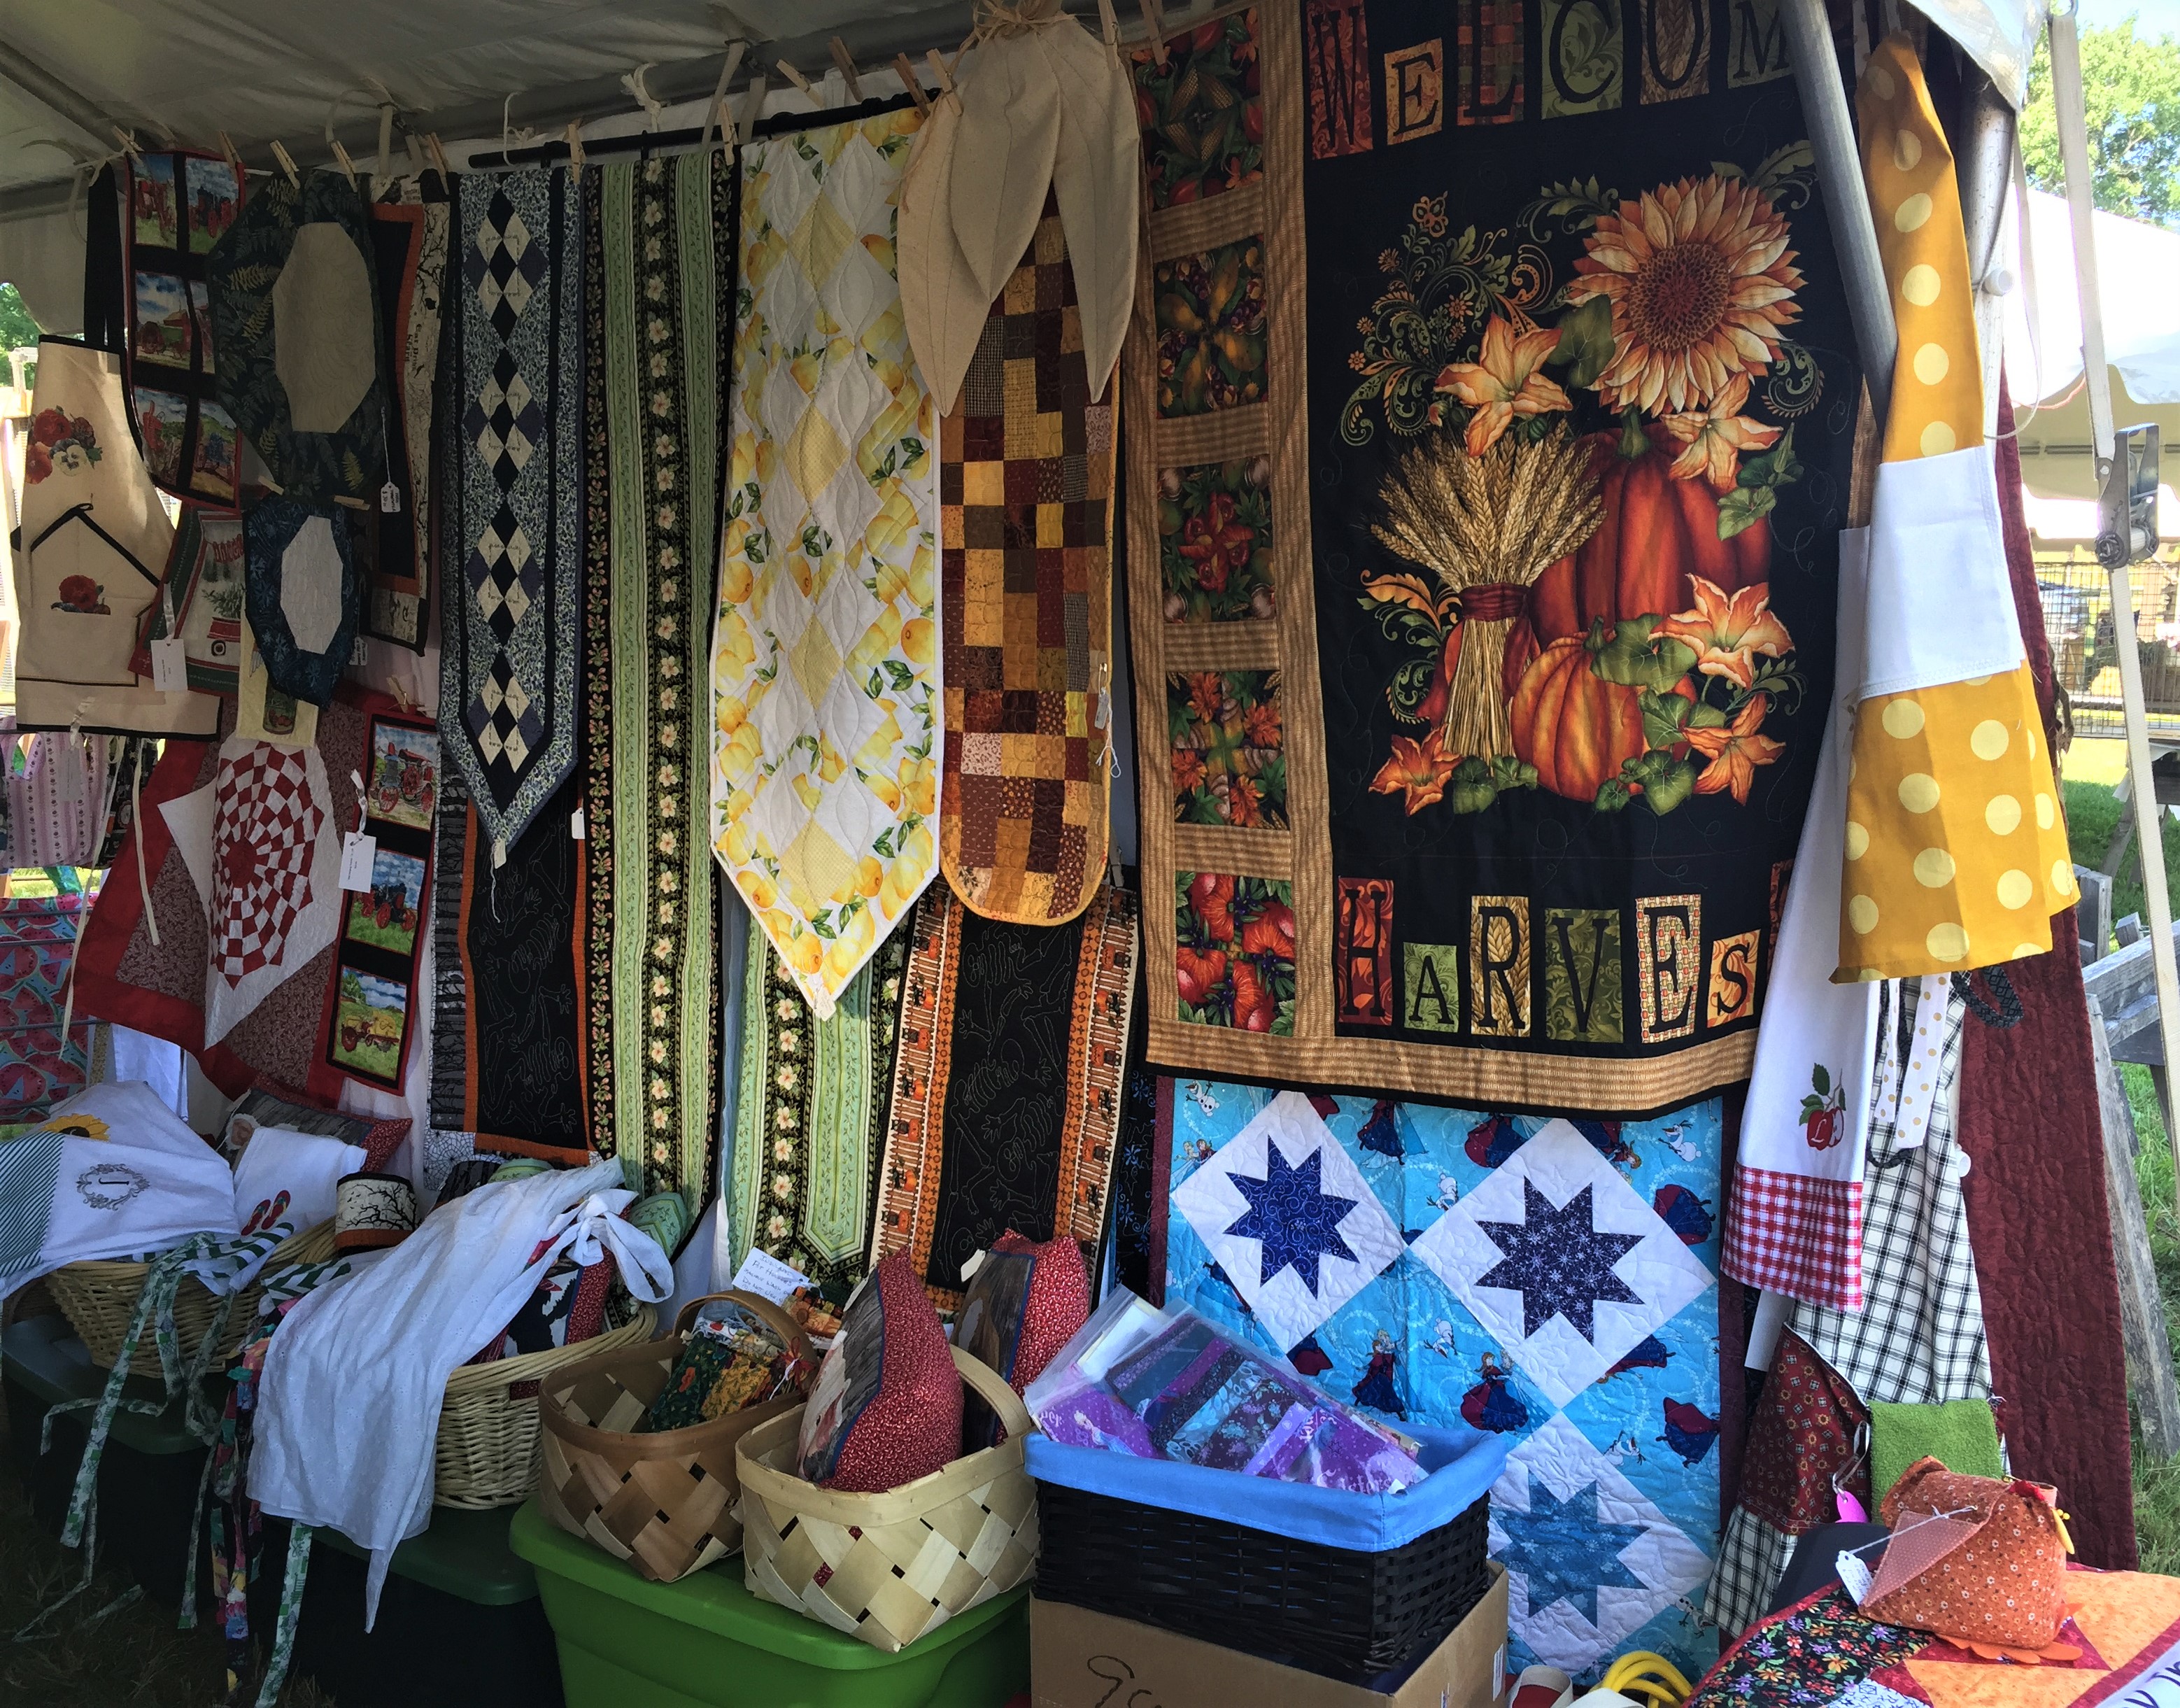 Even More Quilts for Sale